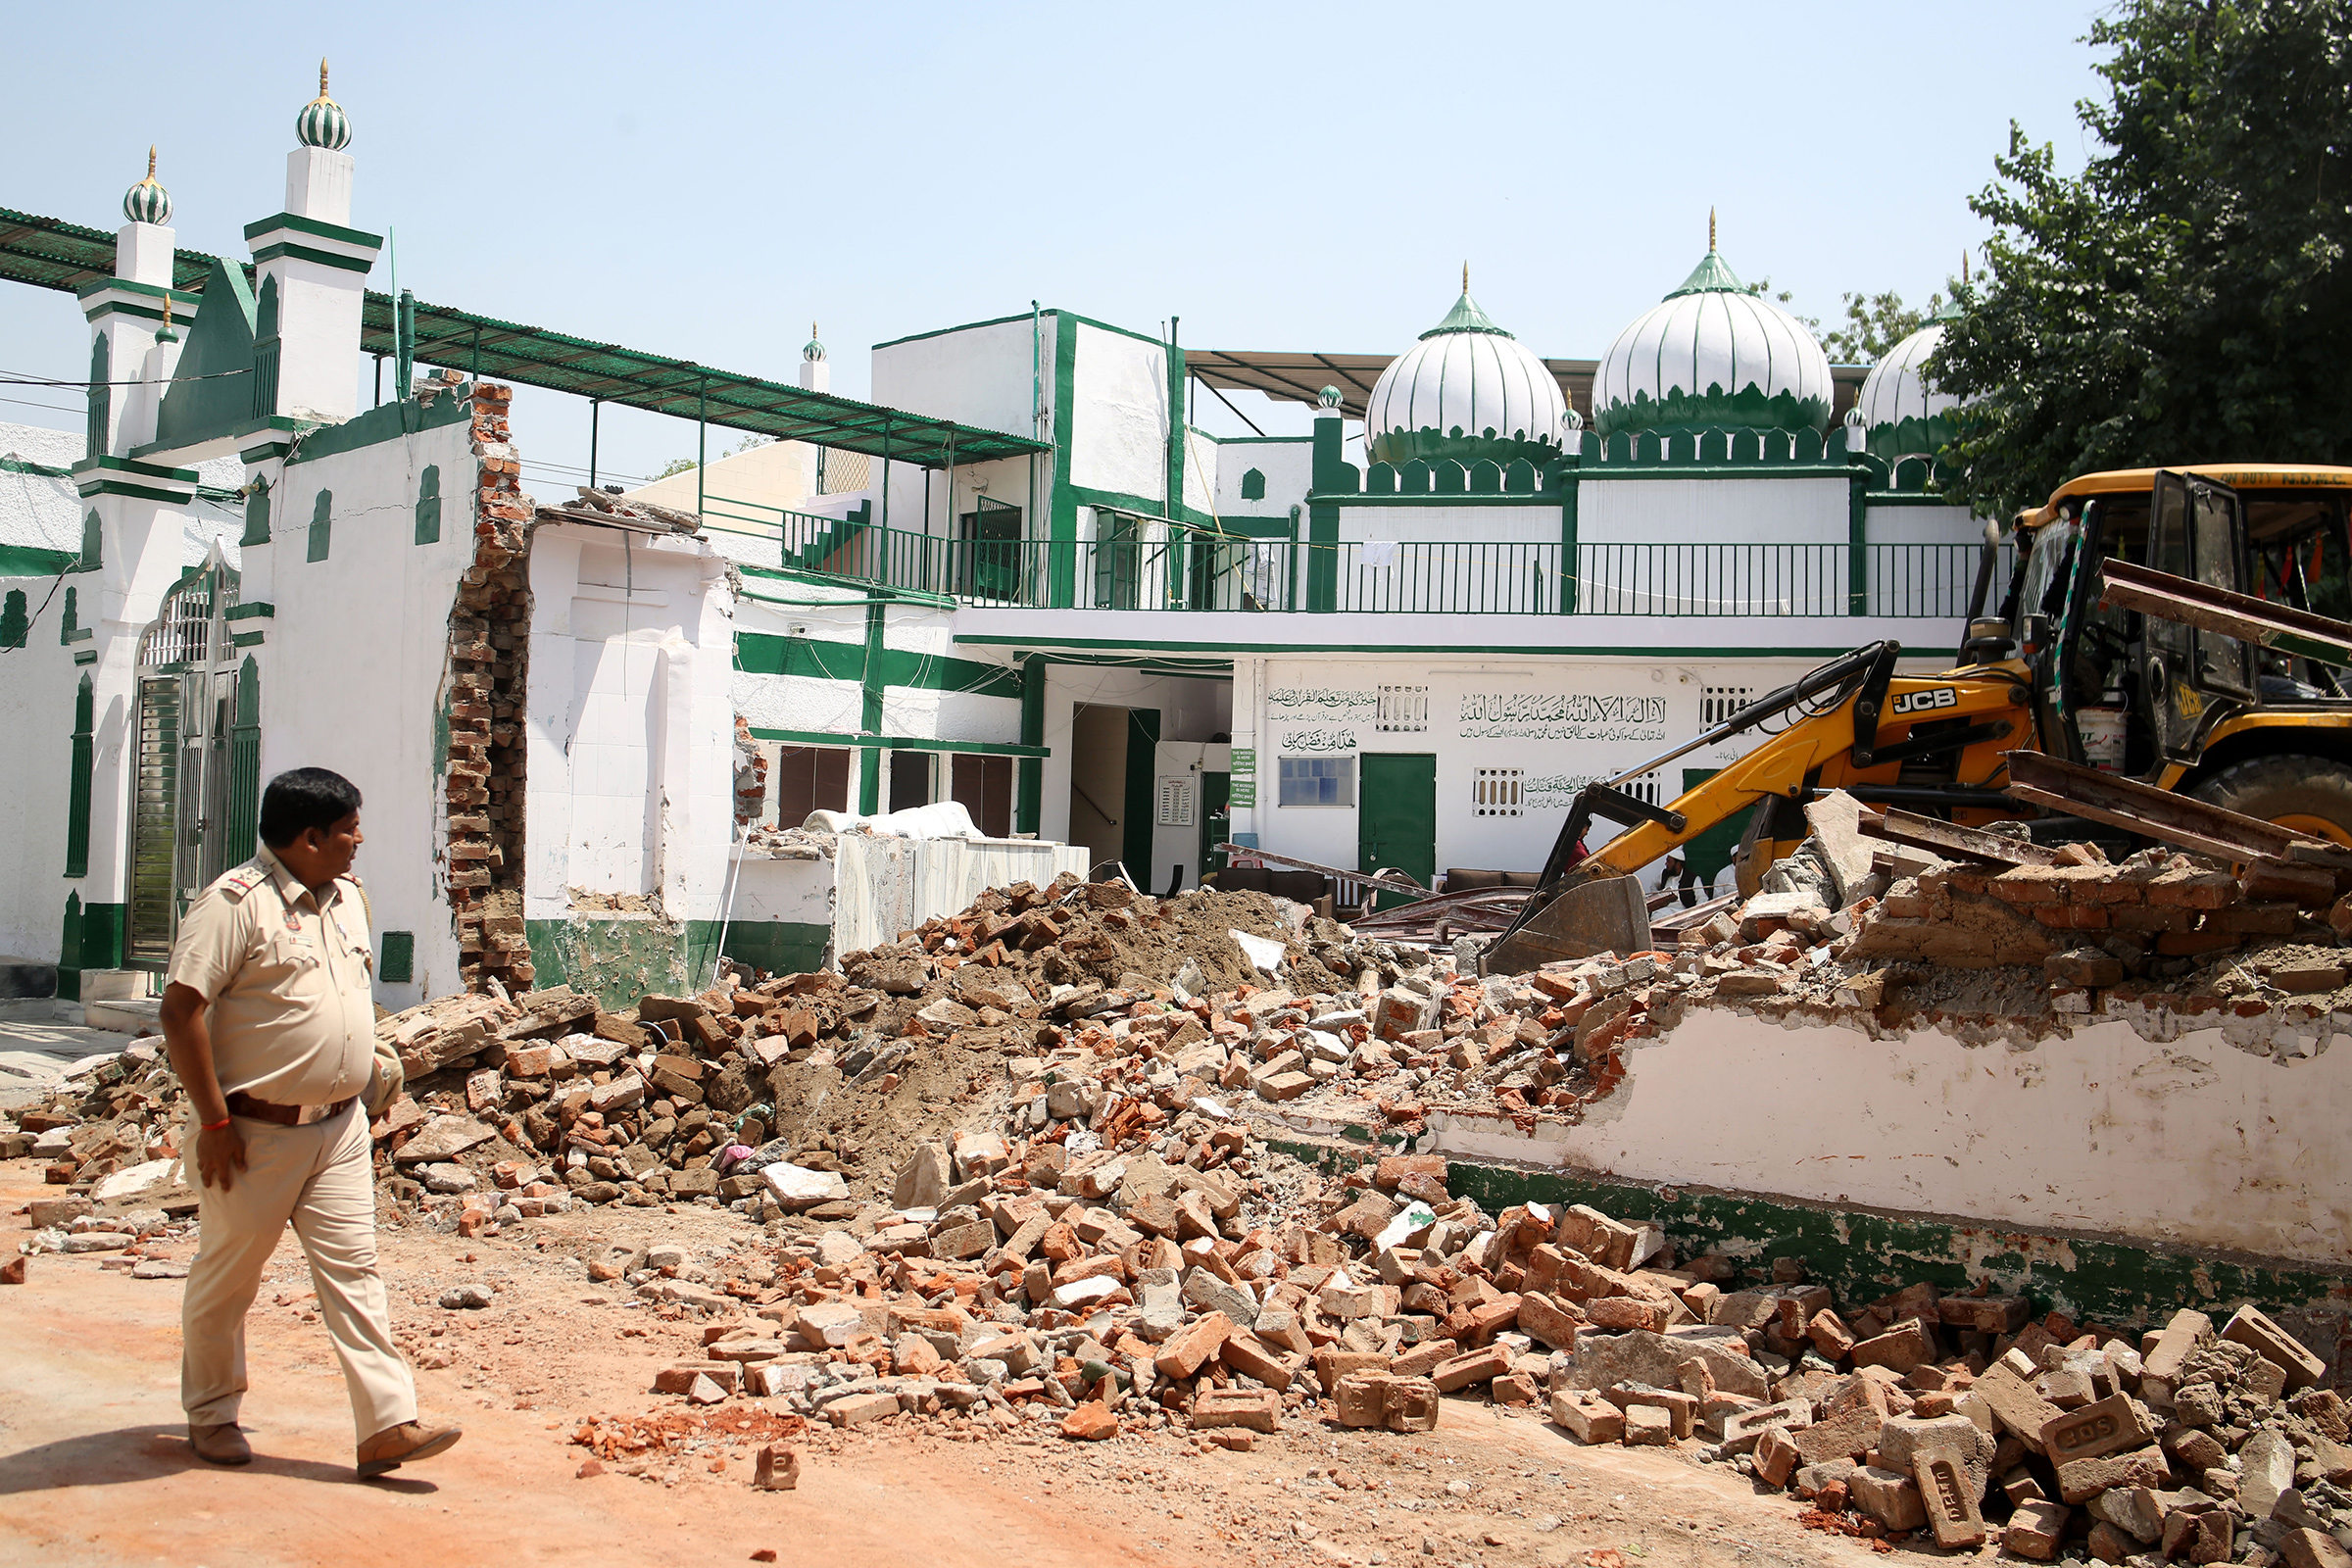 A bulldozer is demolishing an alleged illegal structure of a Bengali market mosque during an anti-encroachment drive by the New Delhi Municipal Corporation (NDMC) on April 11.  (Salman Ali—Hindustan Times/Getty Images)